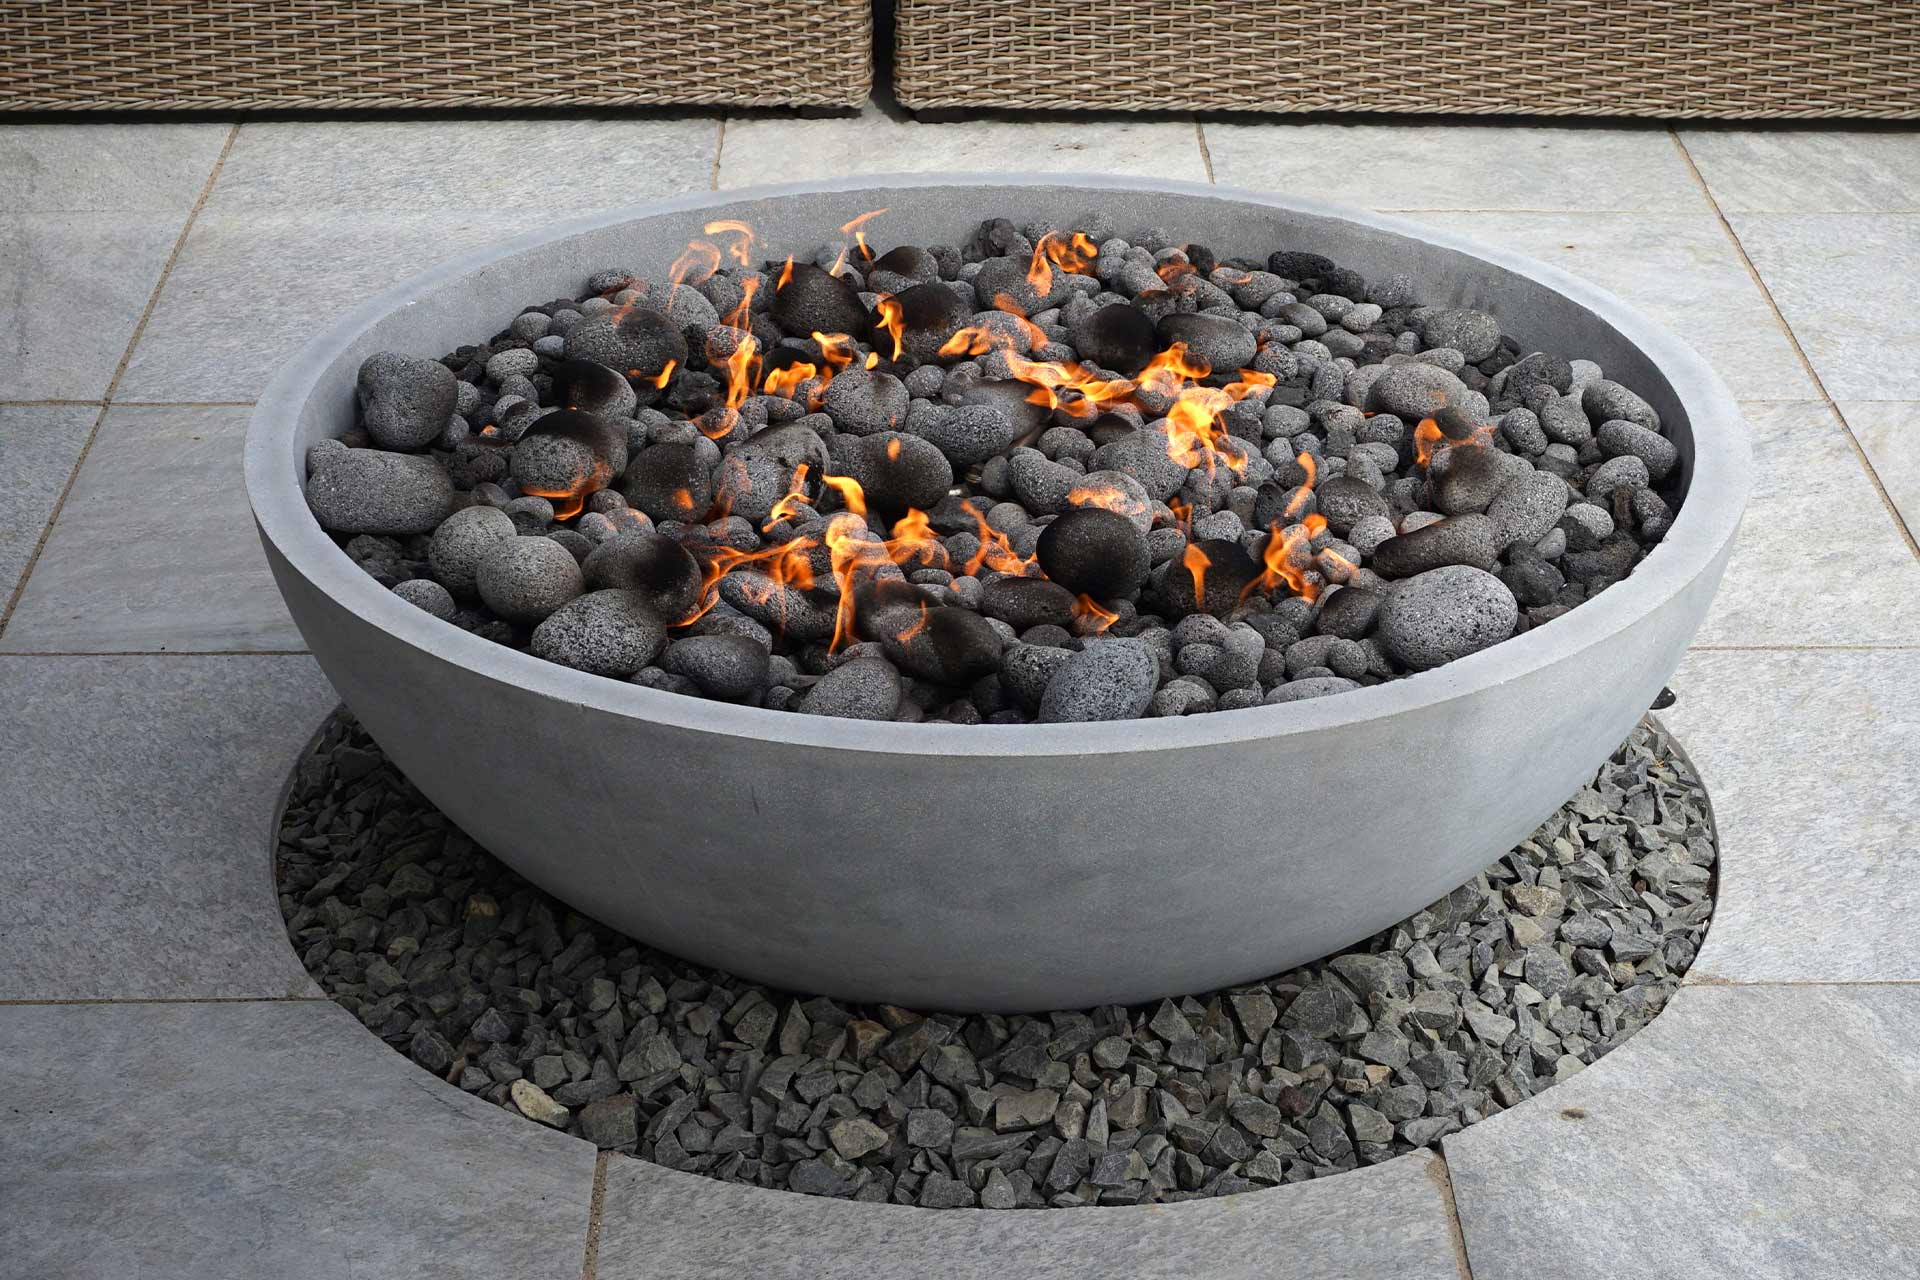 How Much Does A Fire Pit Cost In 2022, How Much Does A Backyard Fire Pit Cost